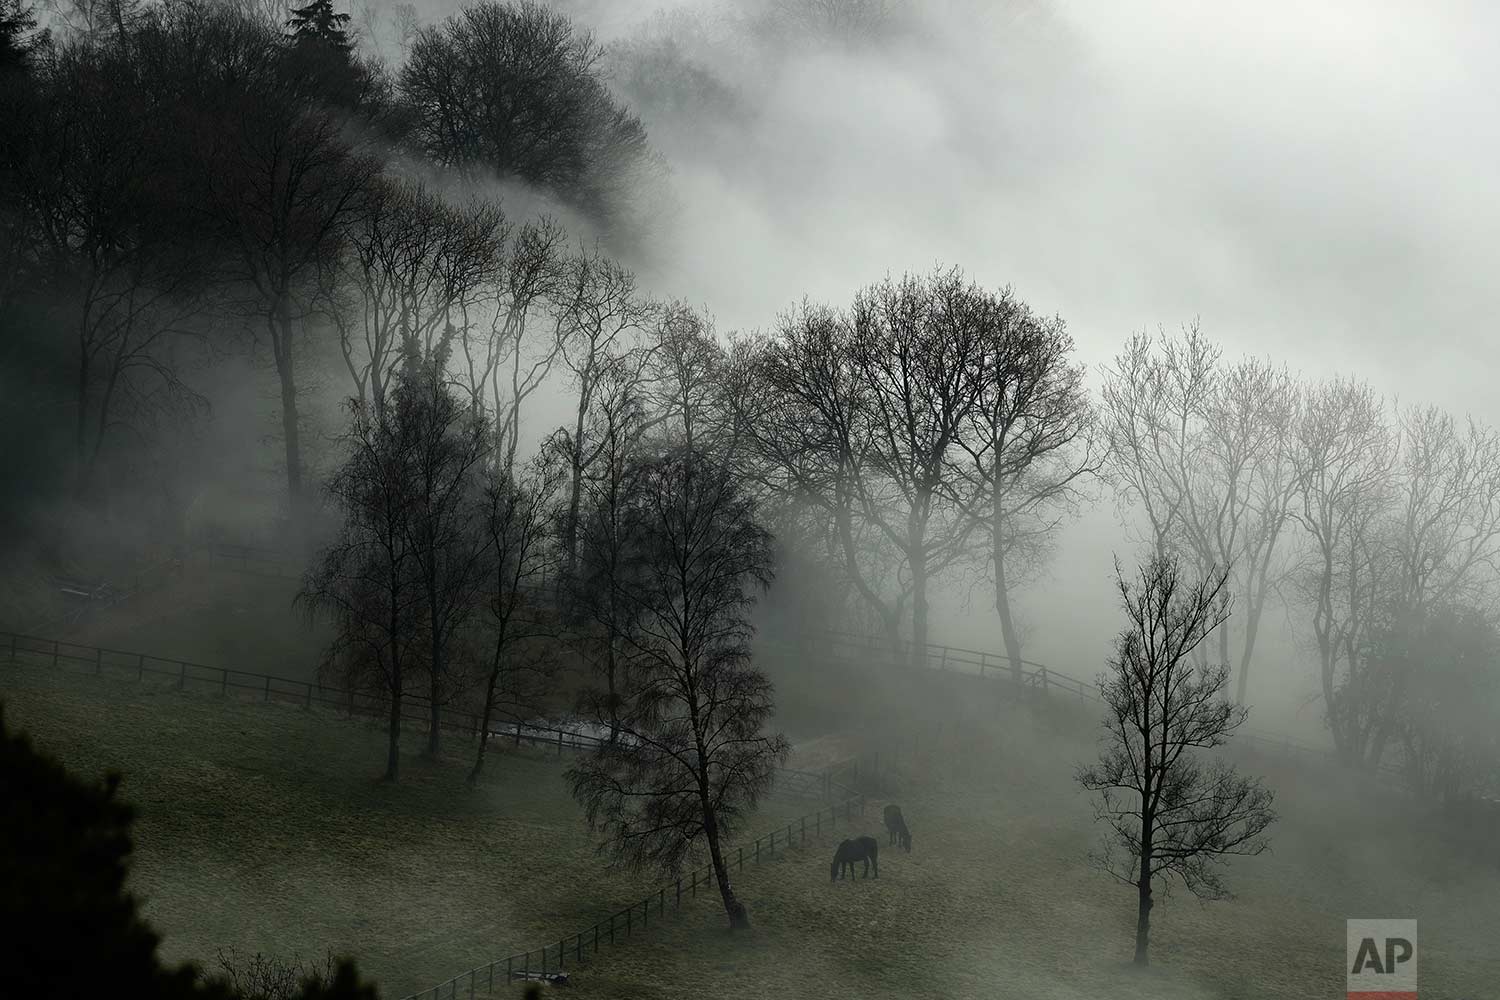  In this Monday, Jan. 23, 2017 photo, horses graze in a paddock with fog enveloping the trees behind them, as seen from Leith Hill in Surrey, south west of London. Thick fog has caused numerous flight delays and cancellations at London Heathrow and other area airports. The Met Office issued a severe weather warning for London and most of southern England as driving conditions were also hazardous and slippery. (AP Photo/Matt Dunham)

 